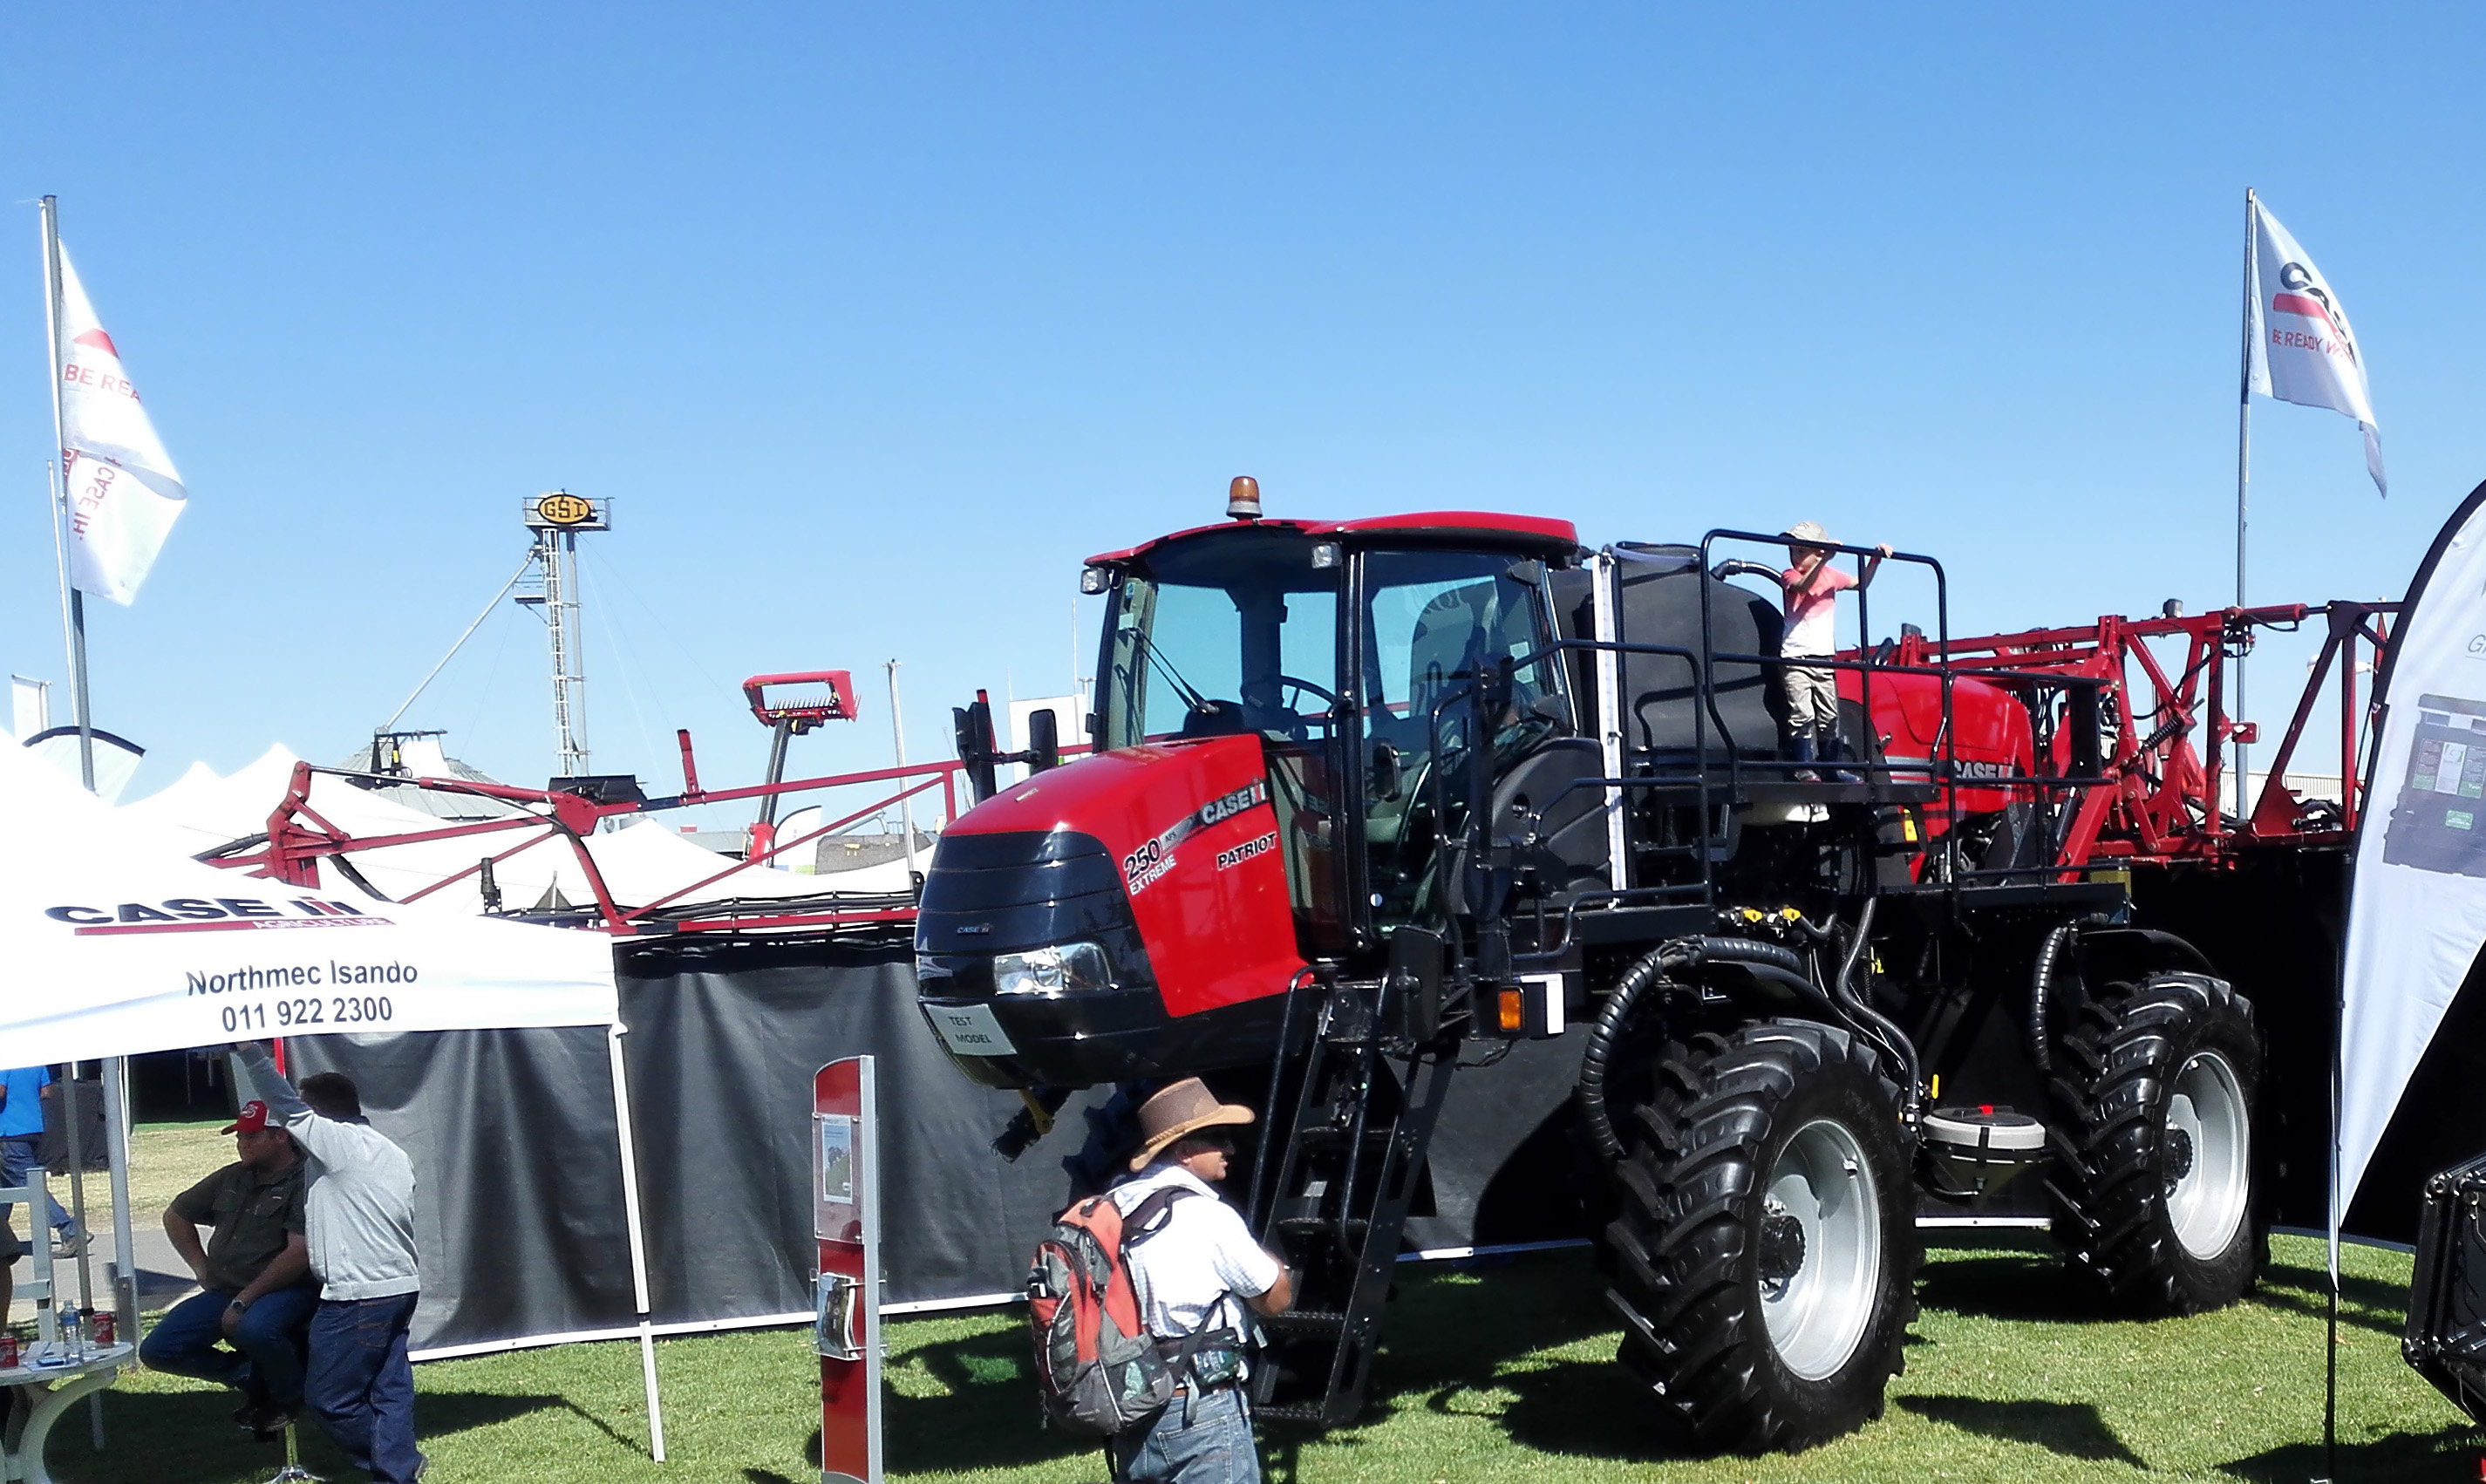 CASE IH SHOWCASES ITS TRACK TECHNOLOGY AT NAMPO 2017